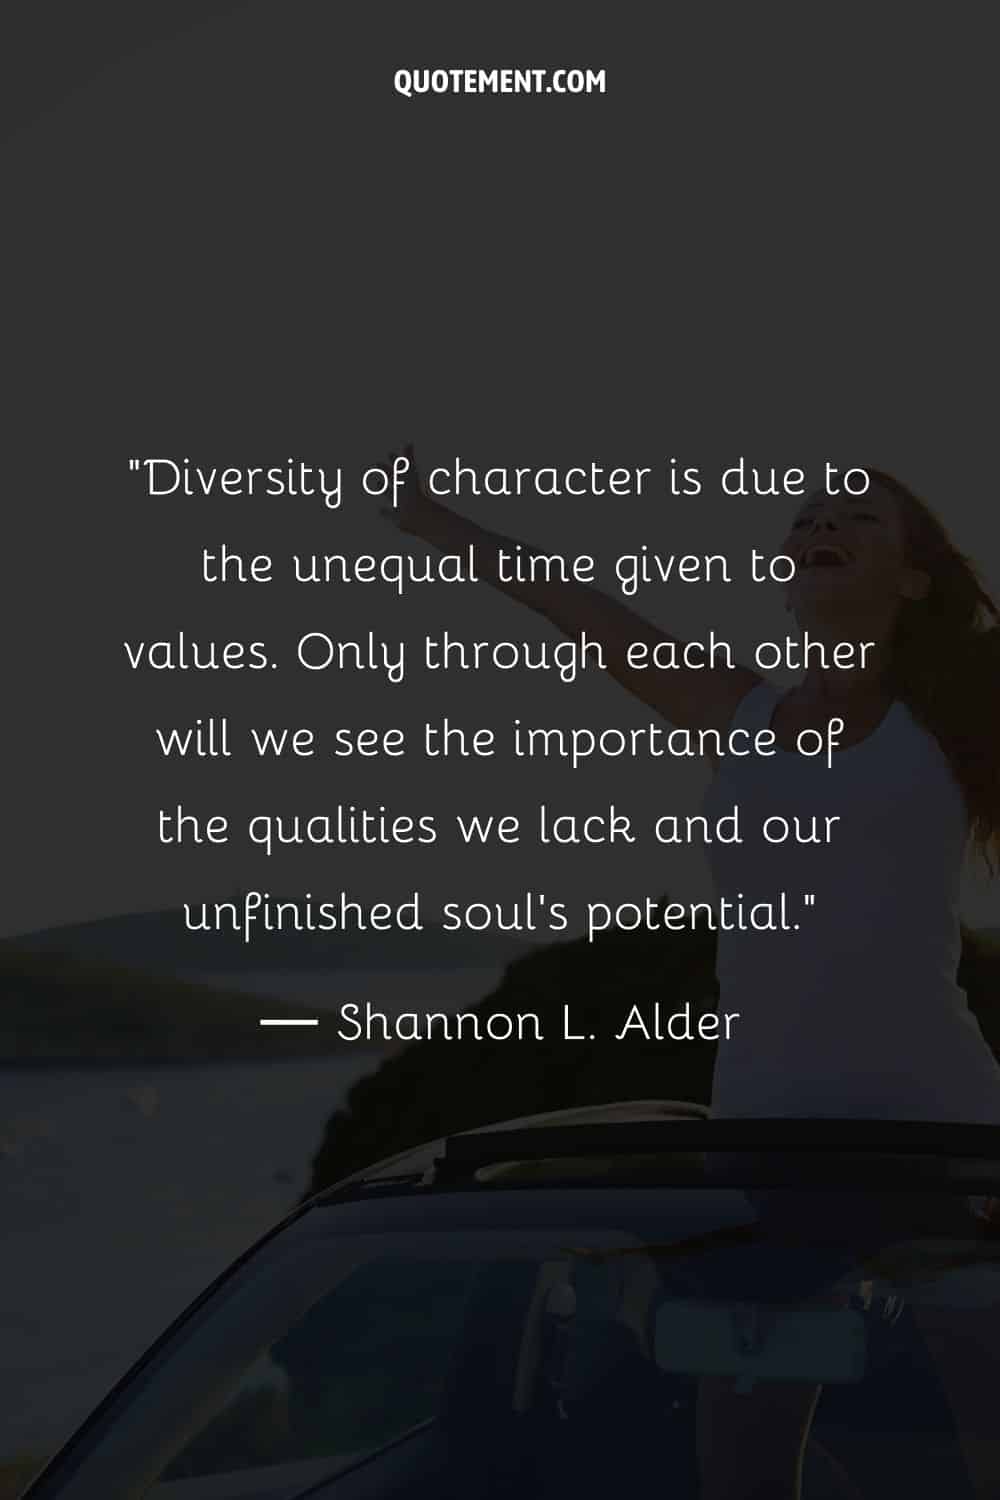 Diversity of character is due to the unequal time given to values